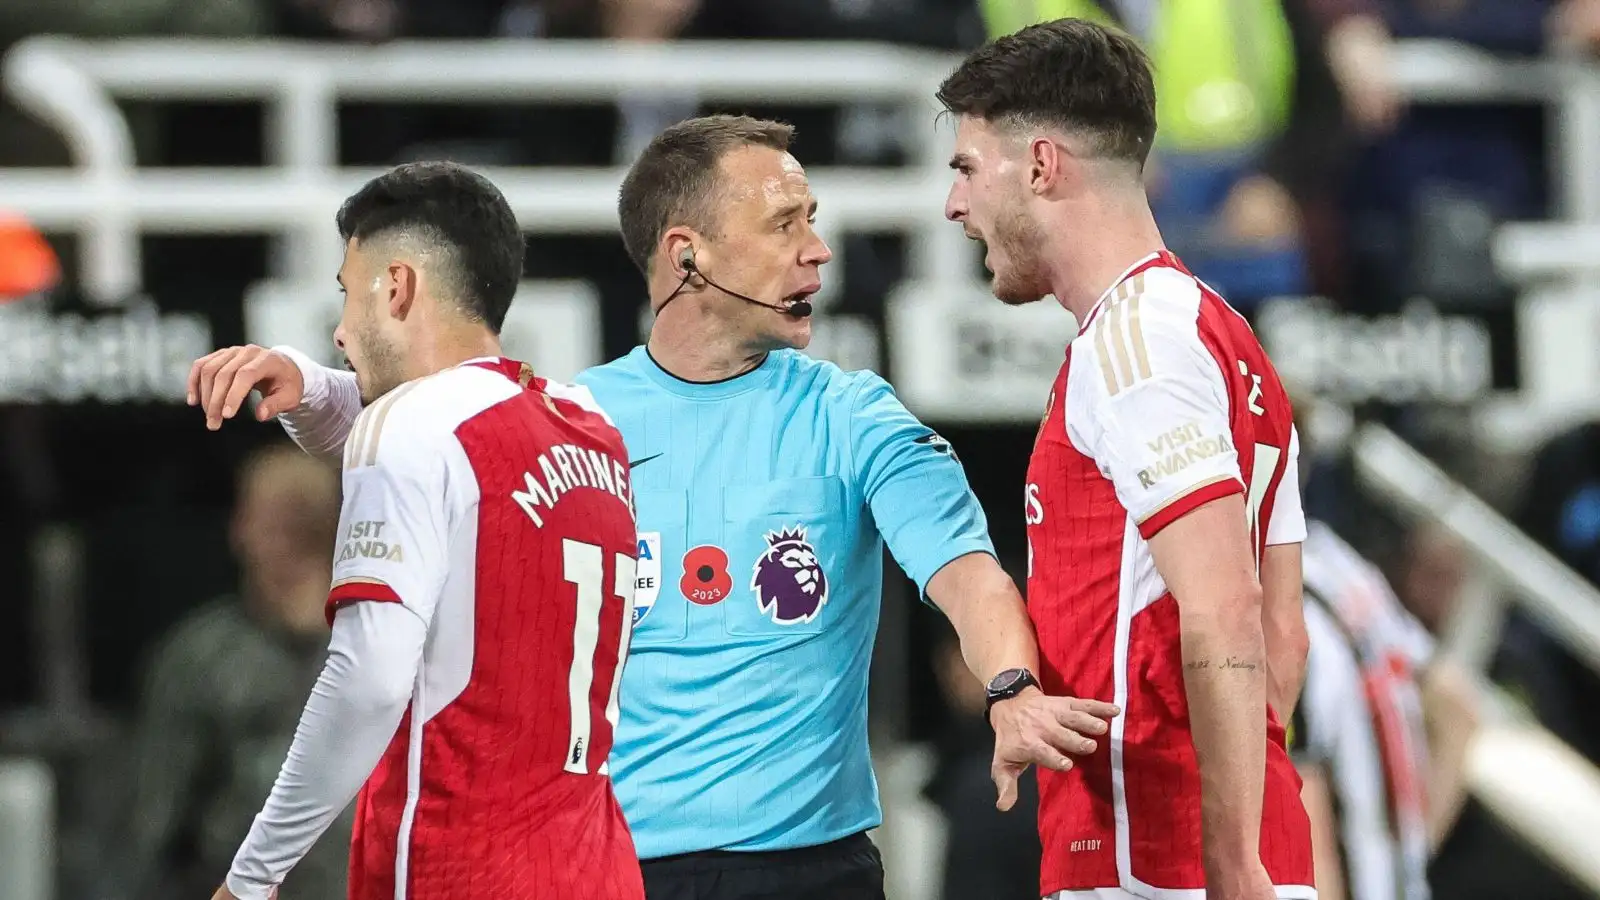 Opinion, Referee right to protect players from objects thrown on pitch